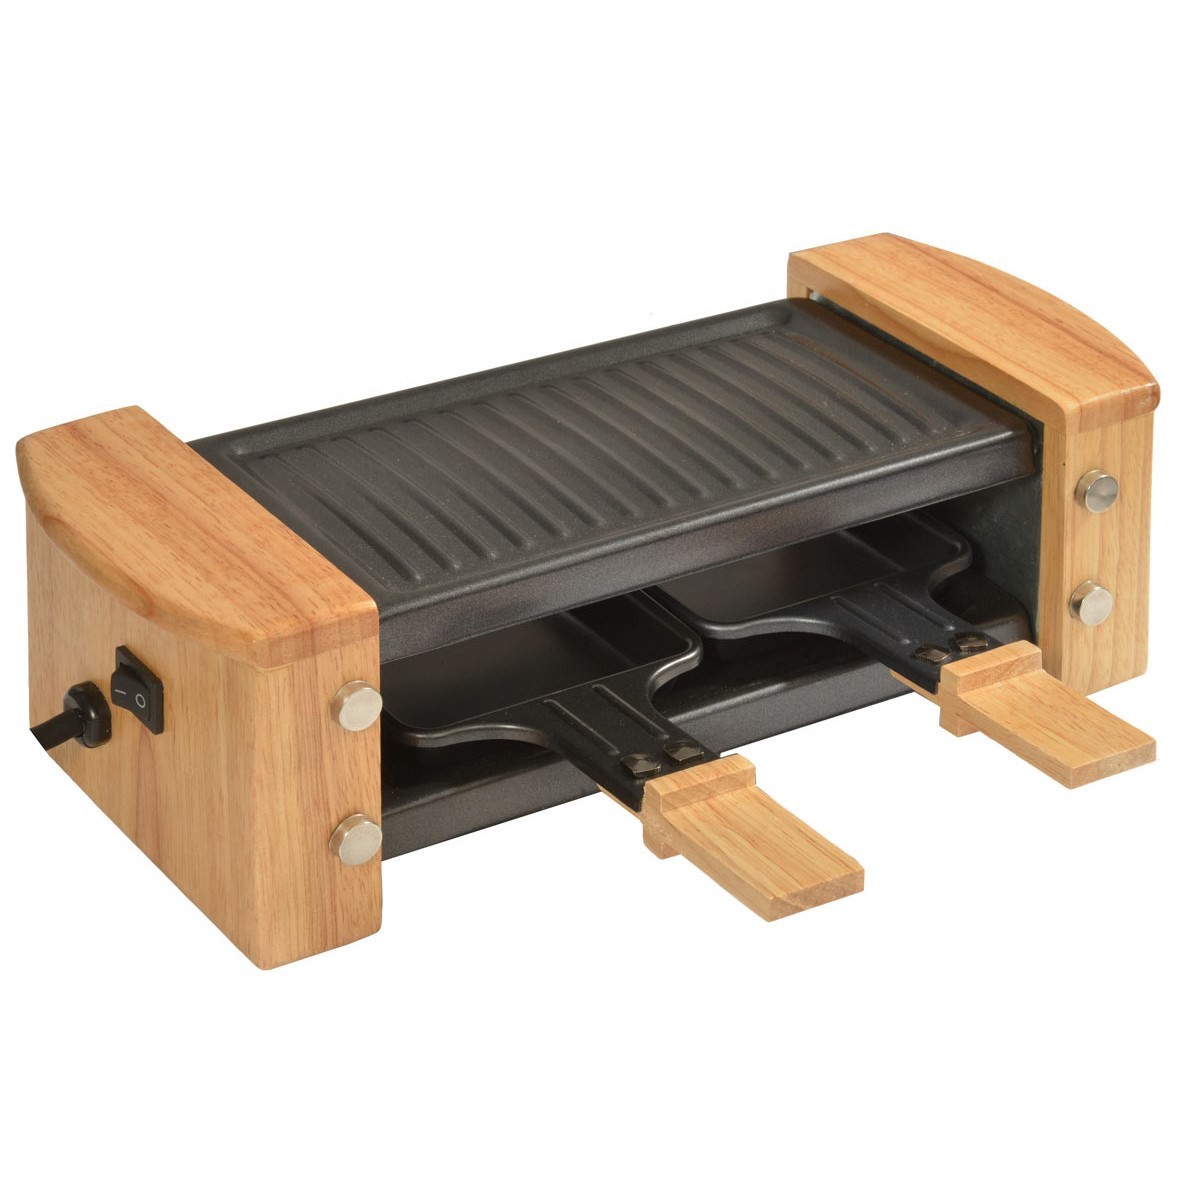 KITCHEN CHEF Raclette Multifonction 350W - KCWOOD2